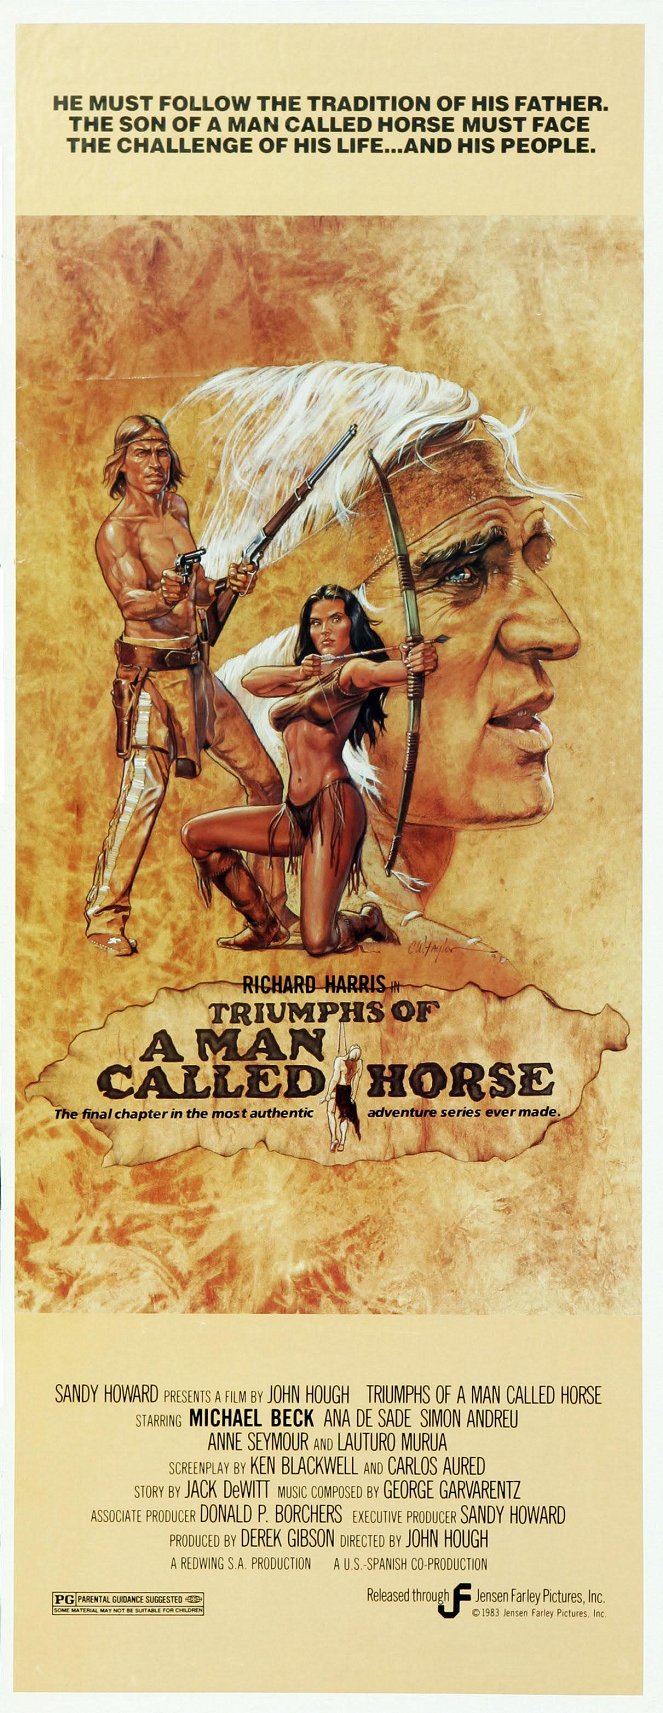 Triumphs of a Man Called Horse - Posters